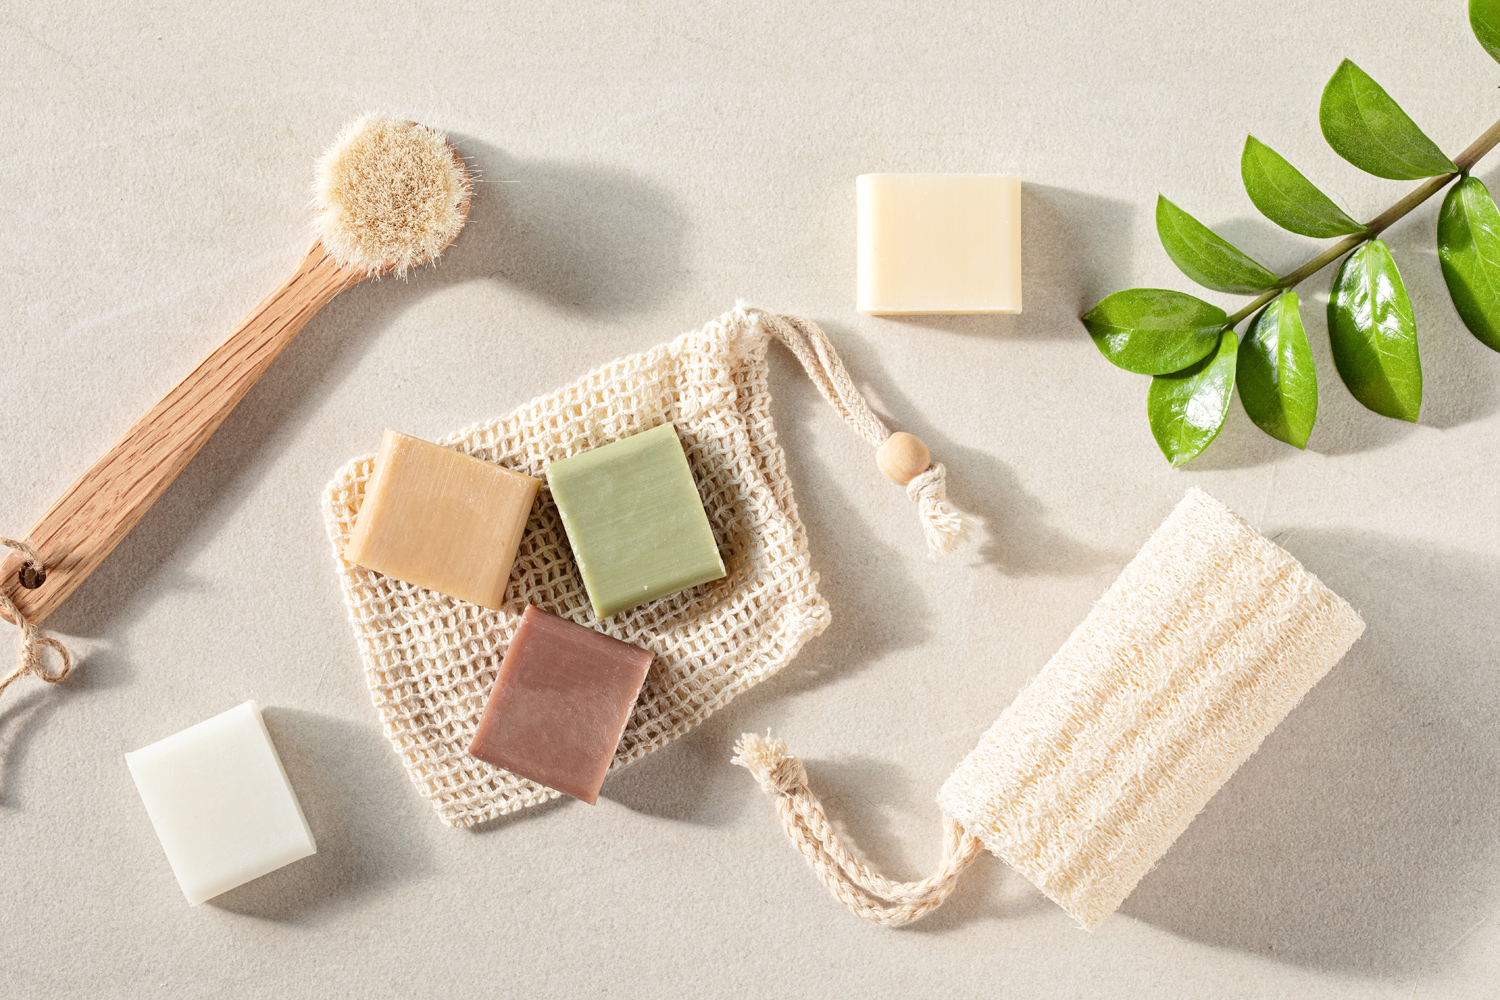 Environment-friendly grooming and bath products beside a plant on a surface.